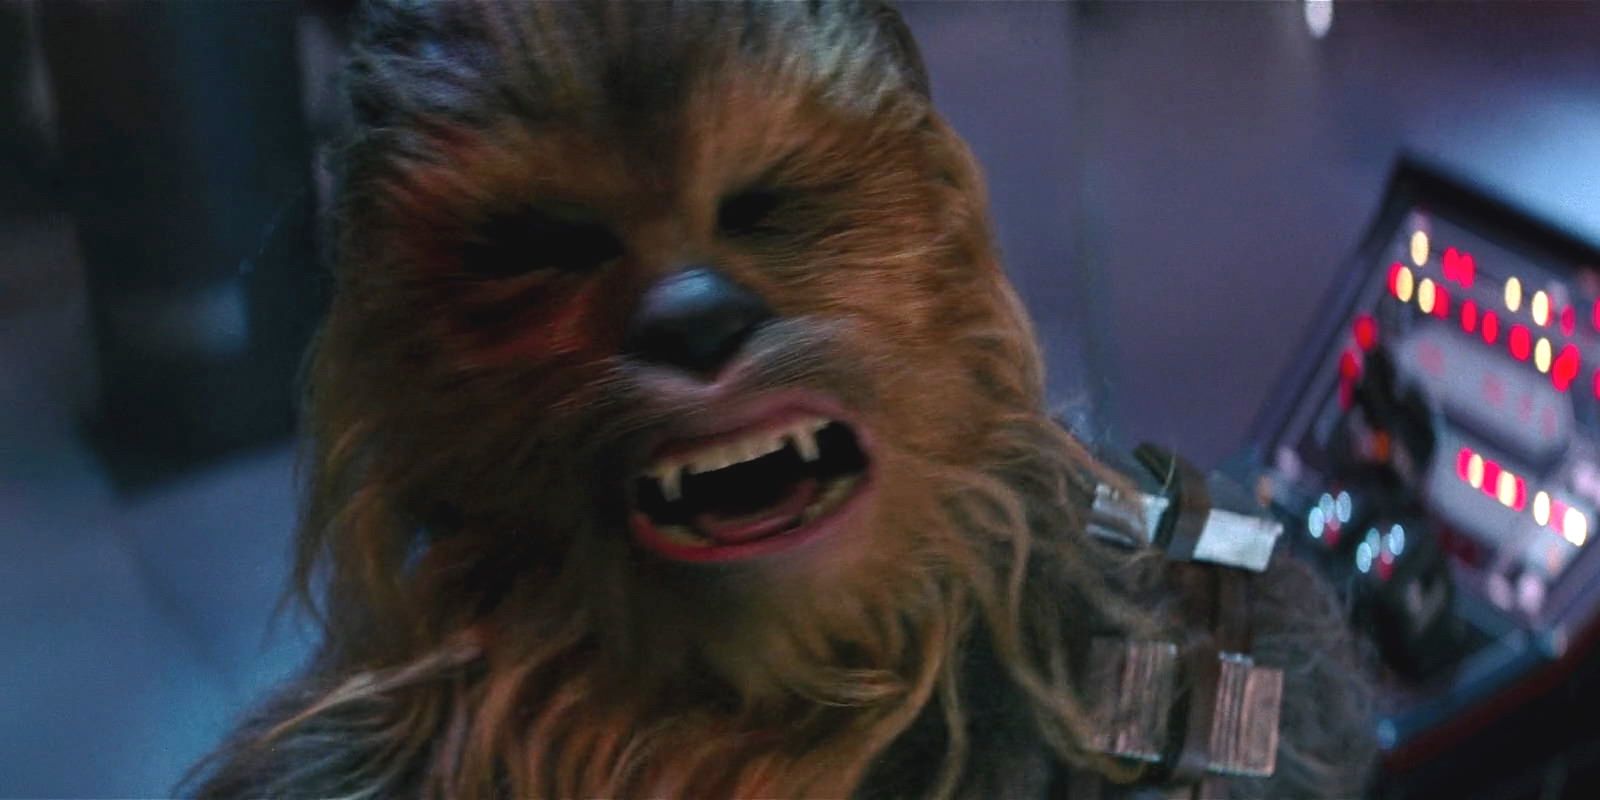 Chewbacca cries after Han solo is killed by Kylo Ren in The Force Awakens